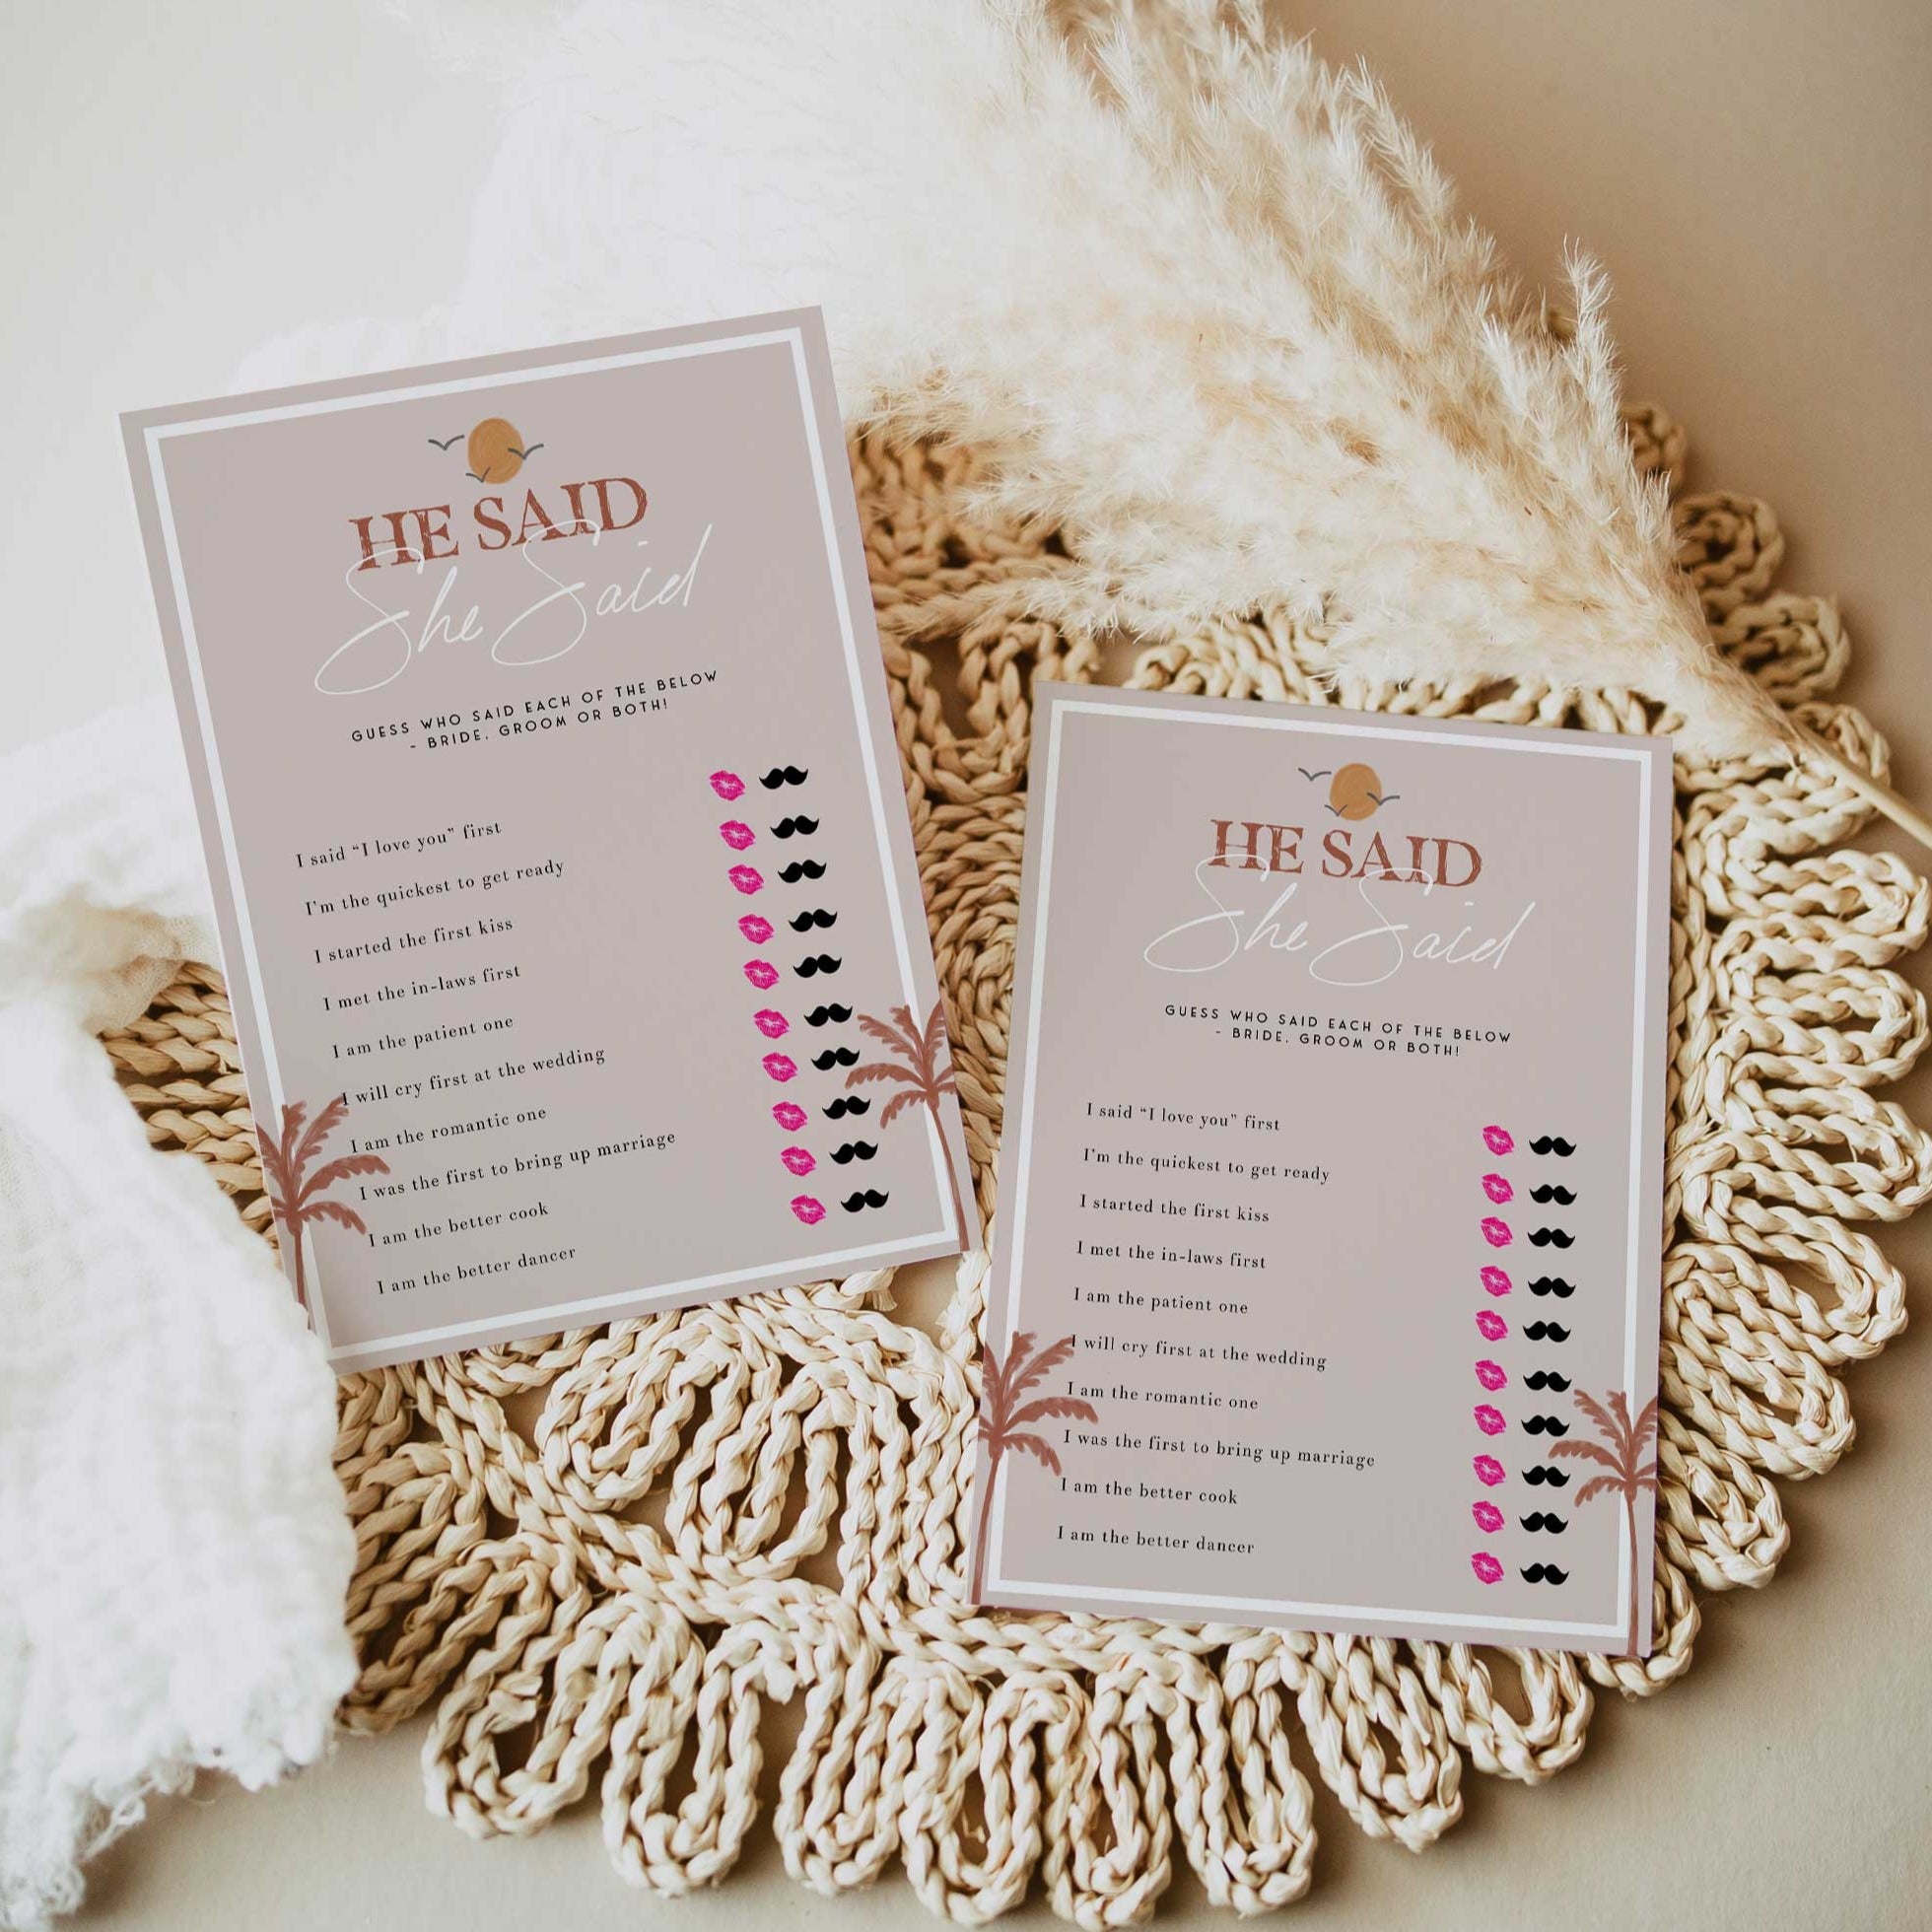 Fully editable and printable bridal shower he said she said bridal game with a Palm Springs design. Perfect for a Palm Springs bridal shower themed party